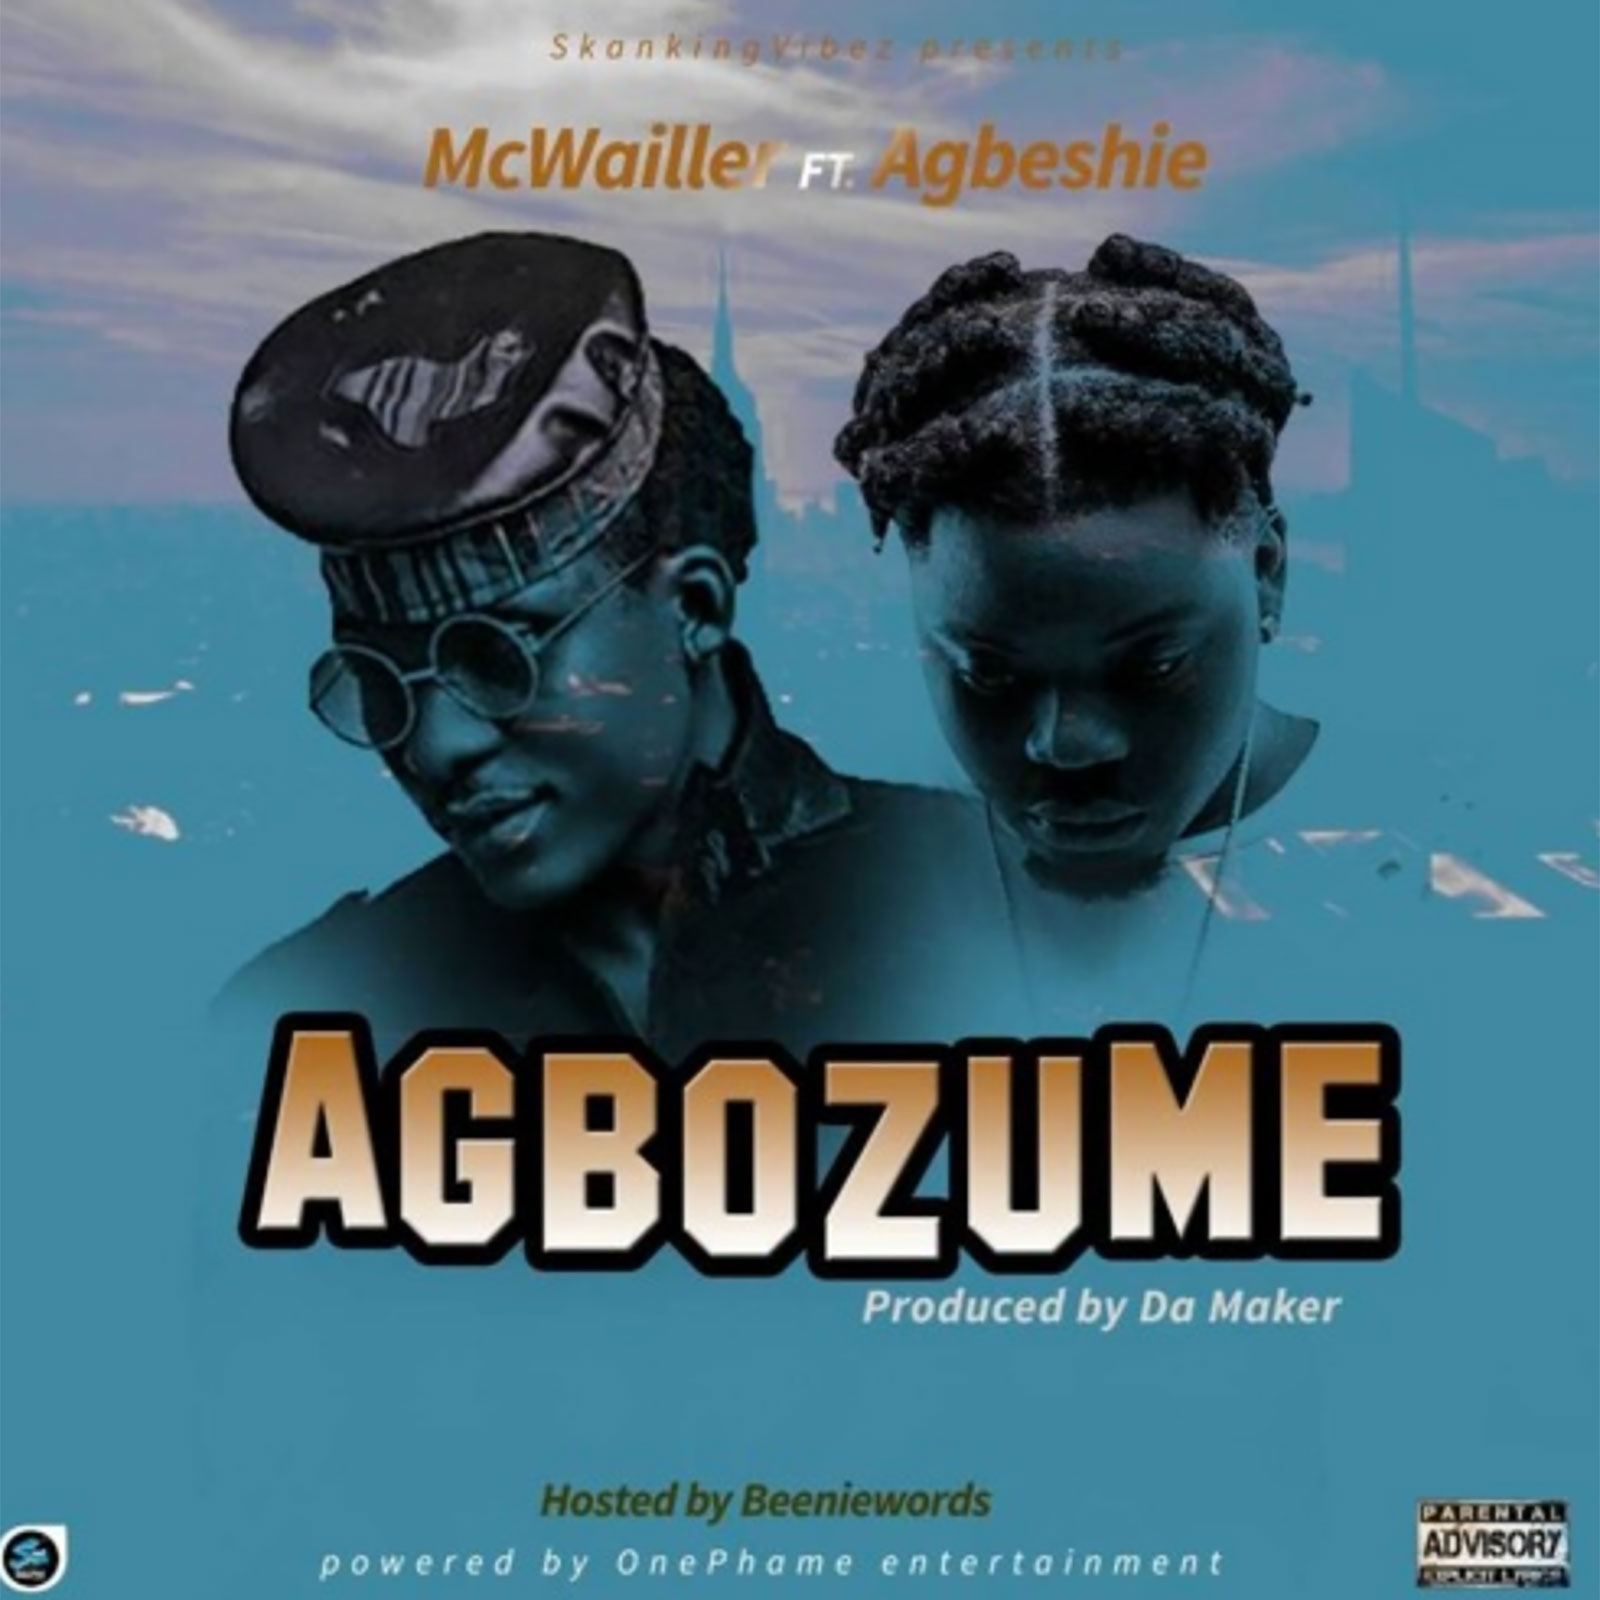 Agbozume by McWailer feat. Agbeshie